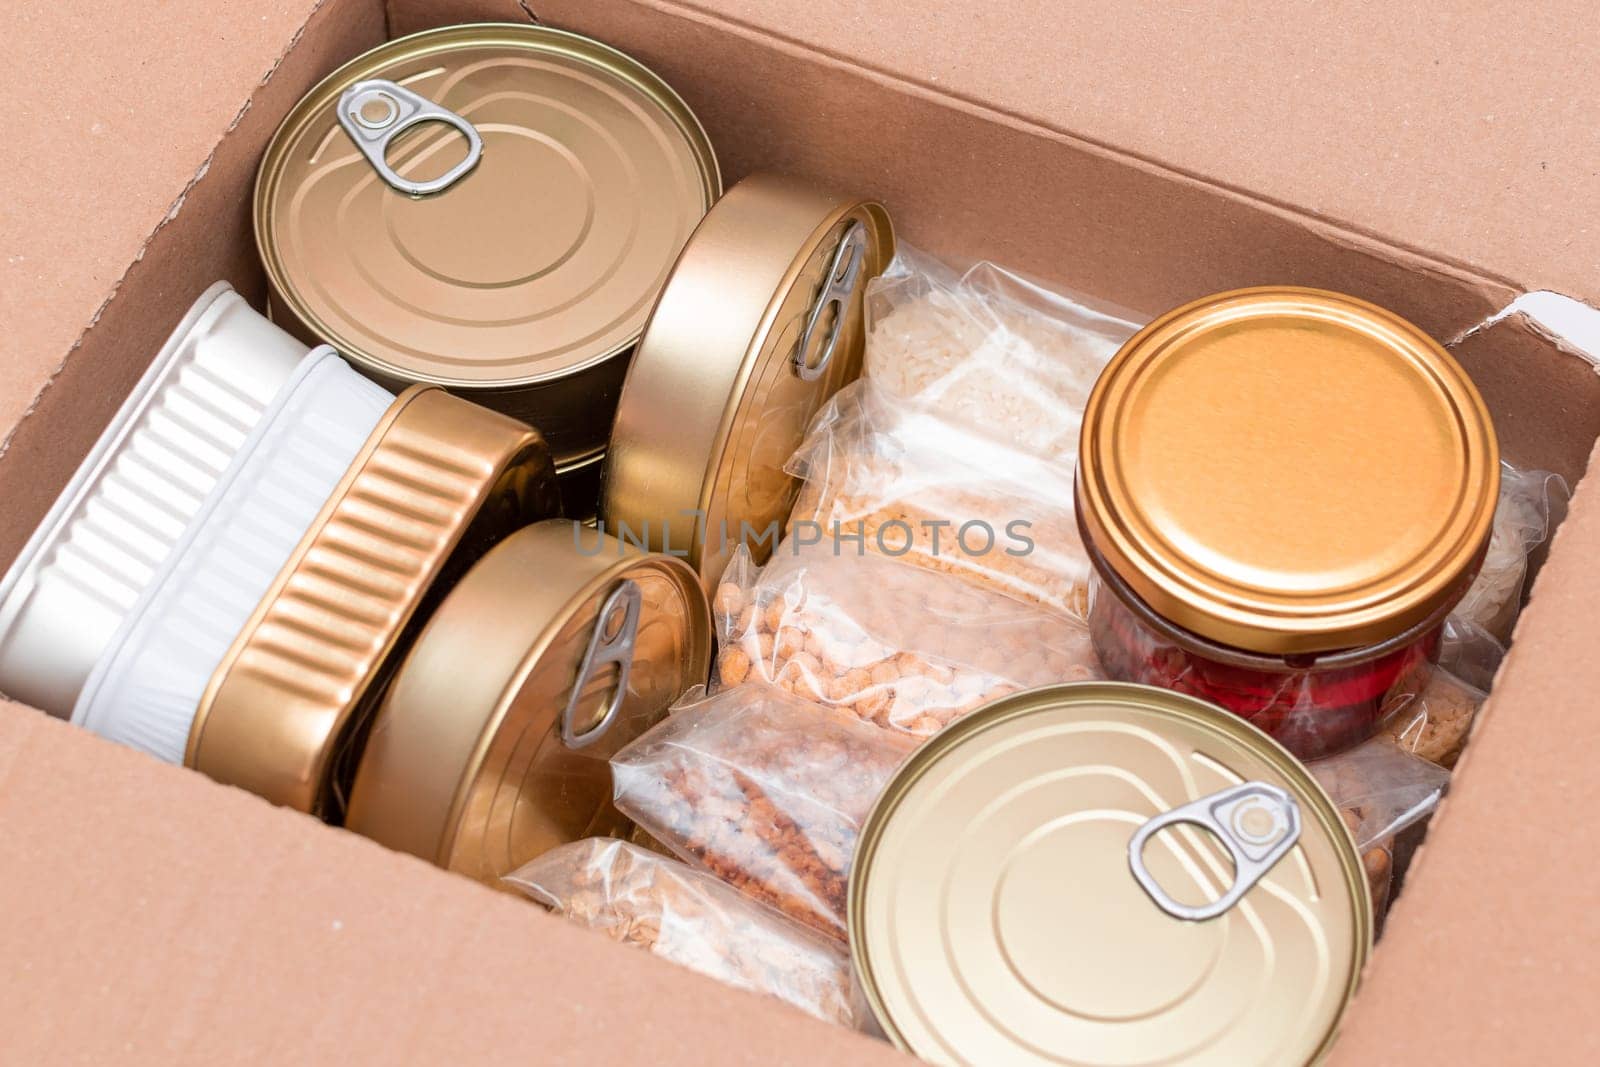 Carton Box with Canned Food, Cereals and Grocery - Donation Box or Food Reserves by InfinitumProdux